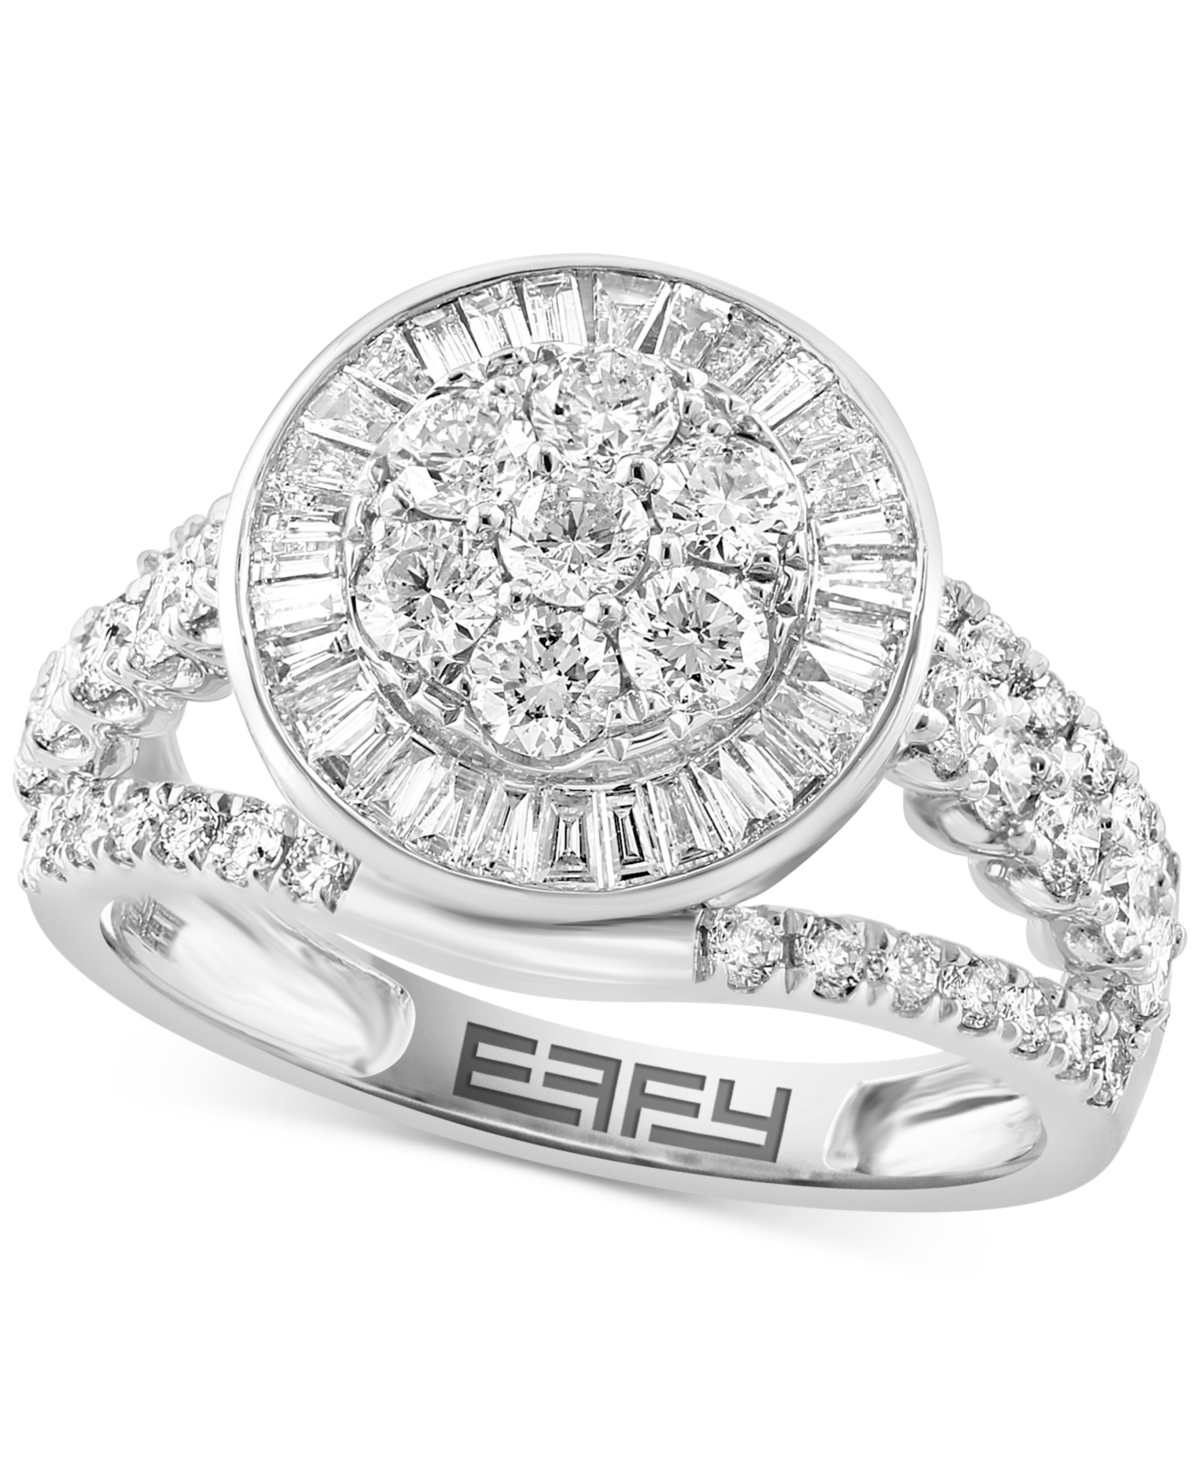 Effy Diamond Round & Baguette Circle Cluster Ring (1-5/8 ct. t.w.) in 14k White Gold - White Gold